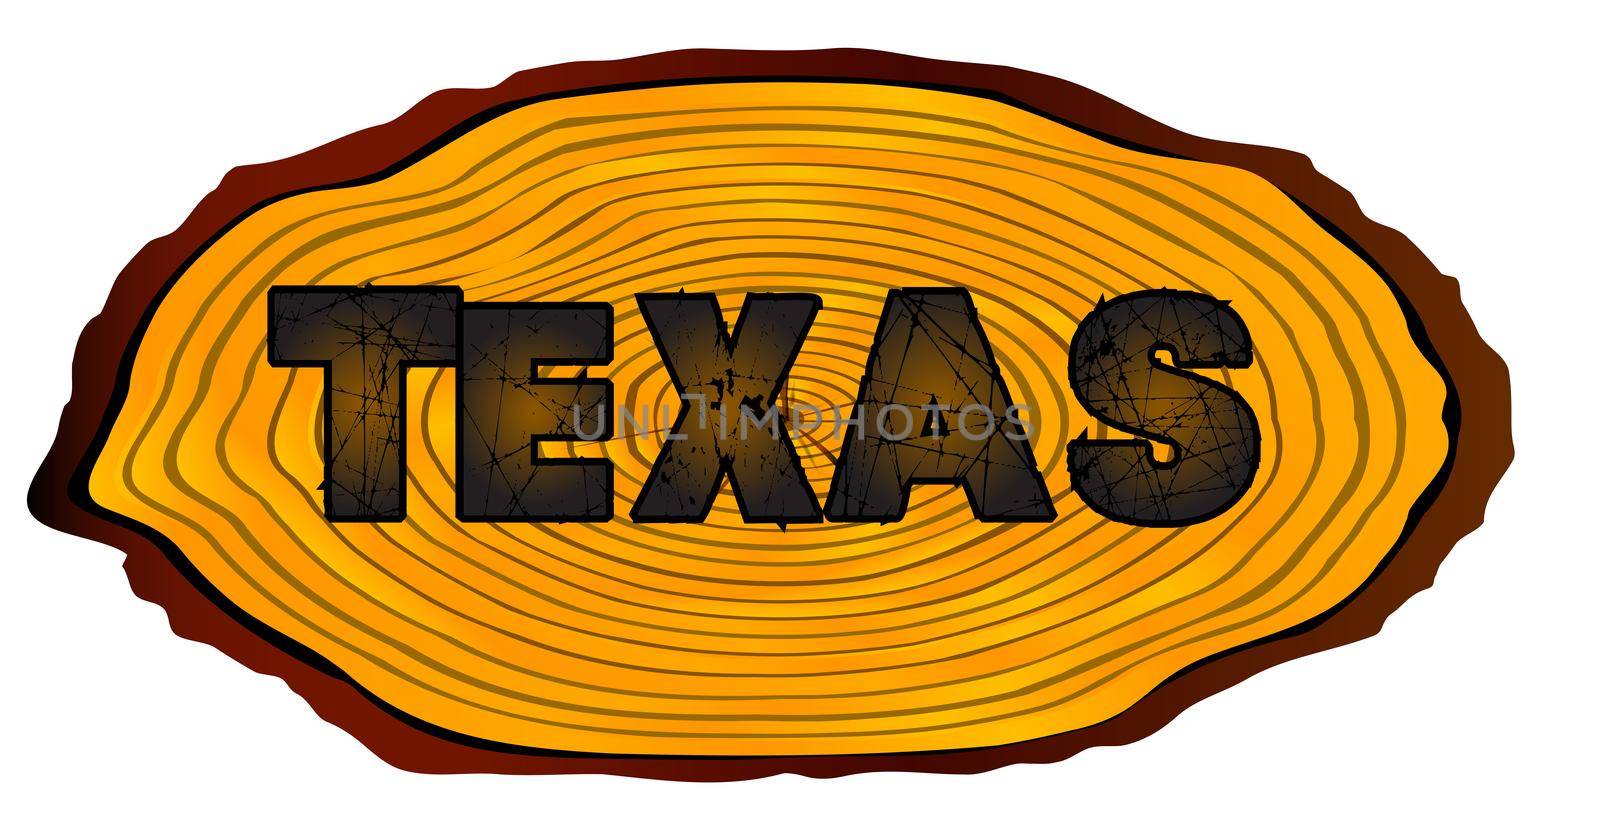 A section of a sawn log with the words TEXAS over a white background